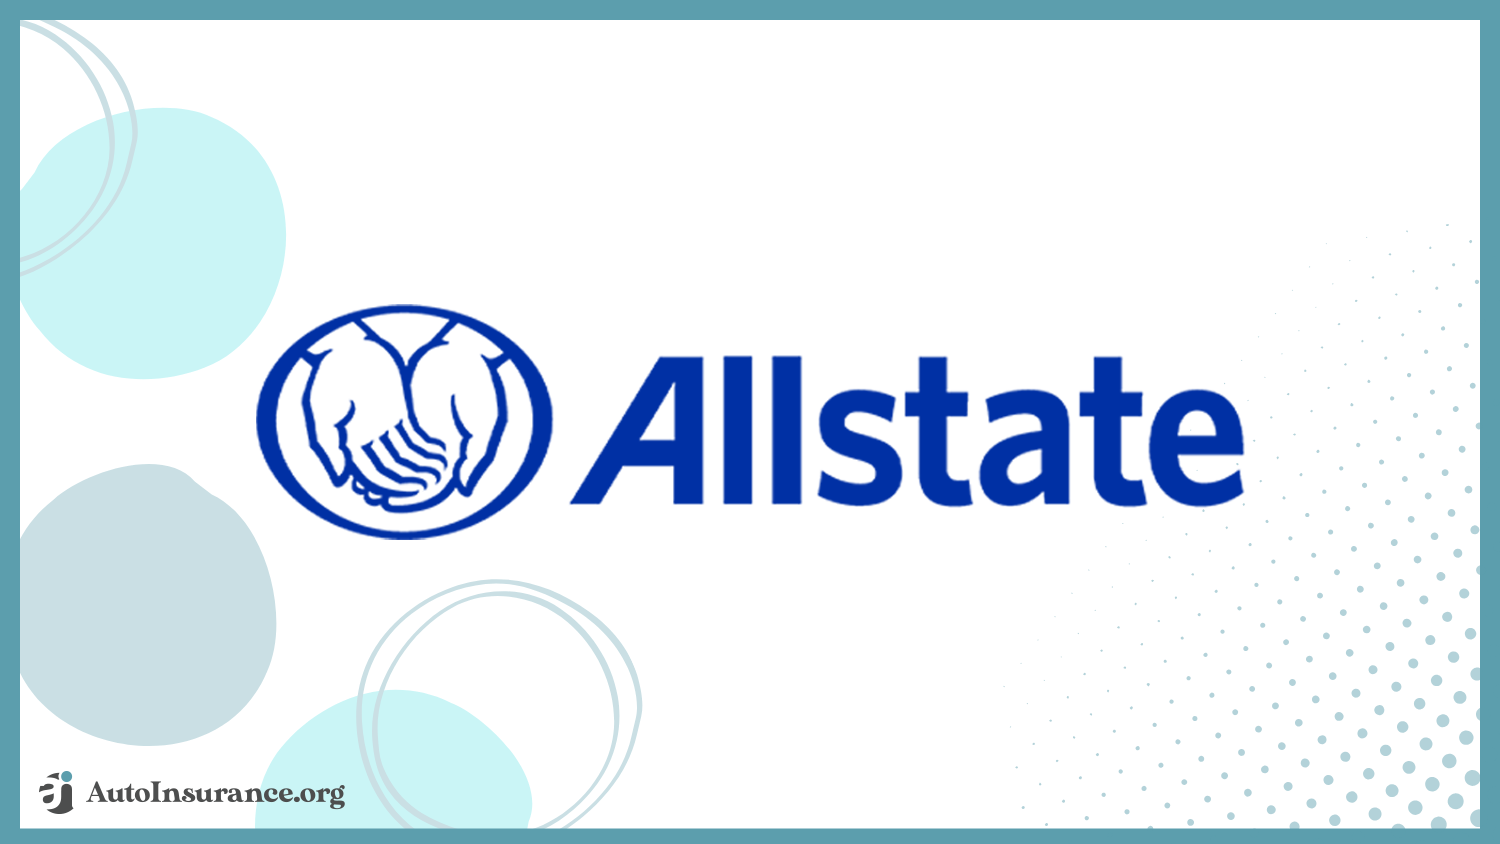 Allstate: Best Auto Insurance Companies for Drivers With Bad Credit